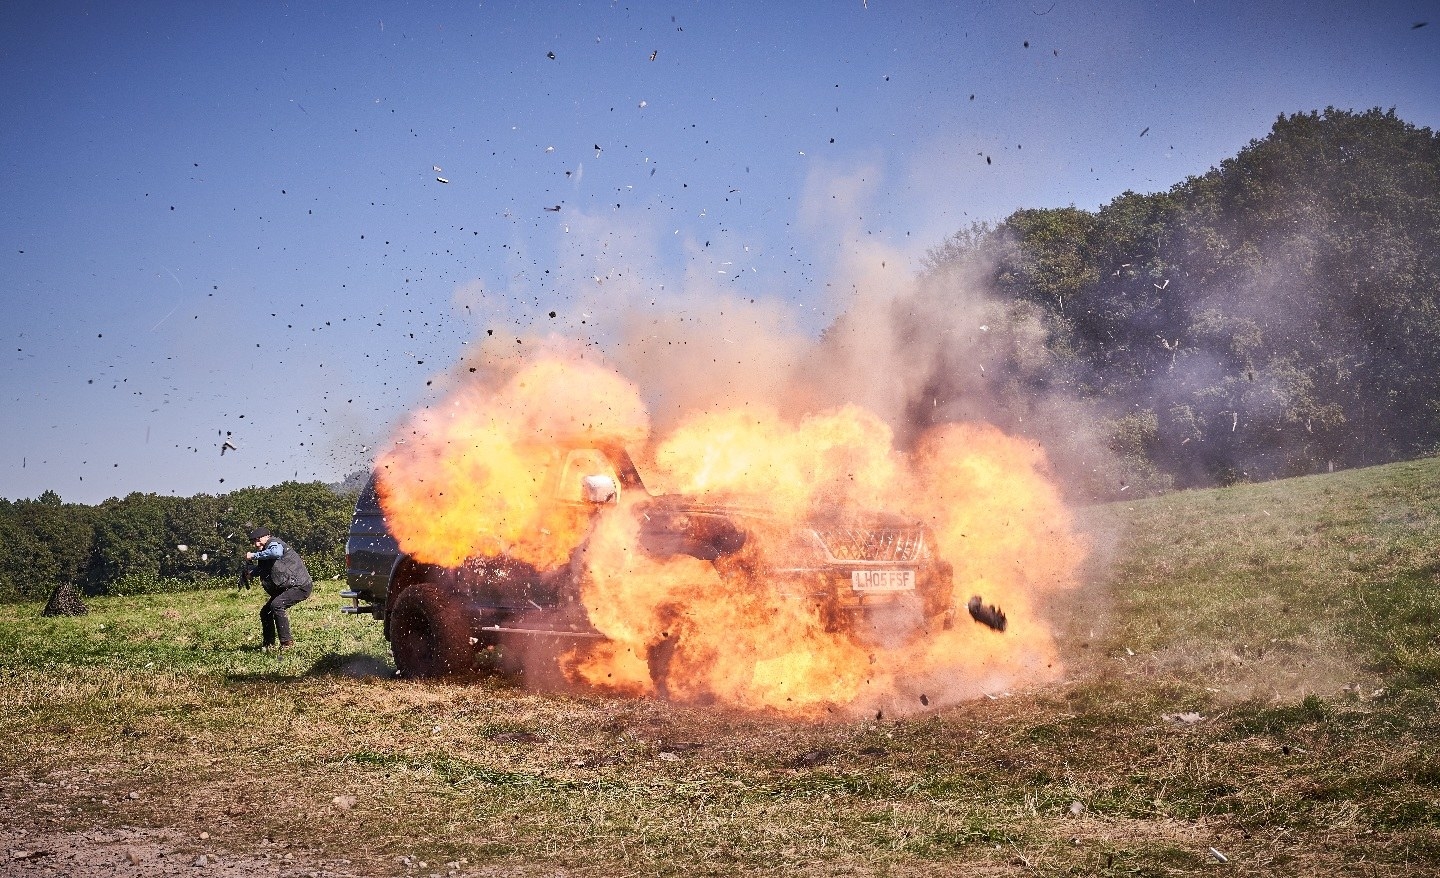 A car explodes after being attacked by mercenaries on a helicopter